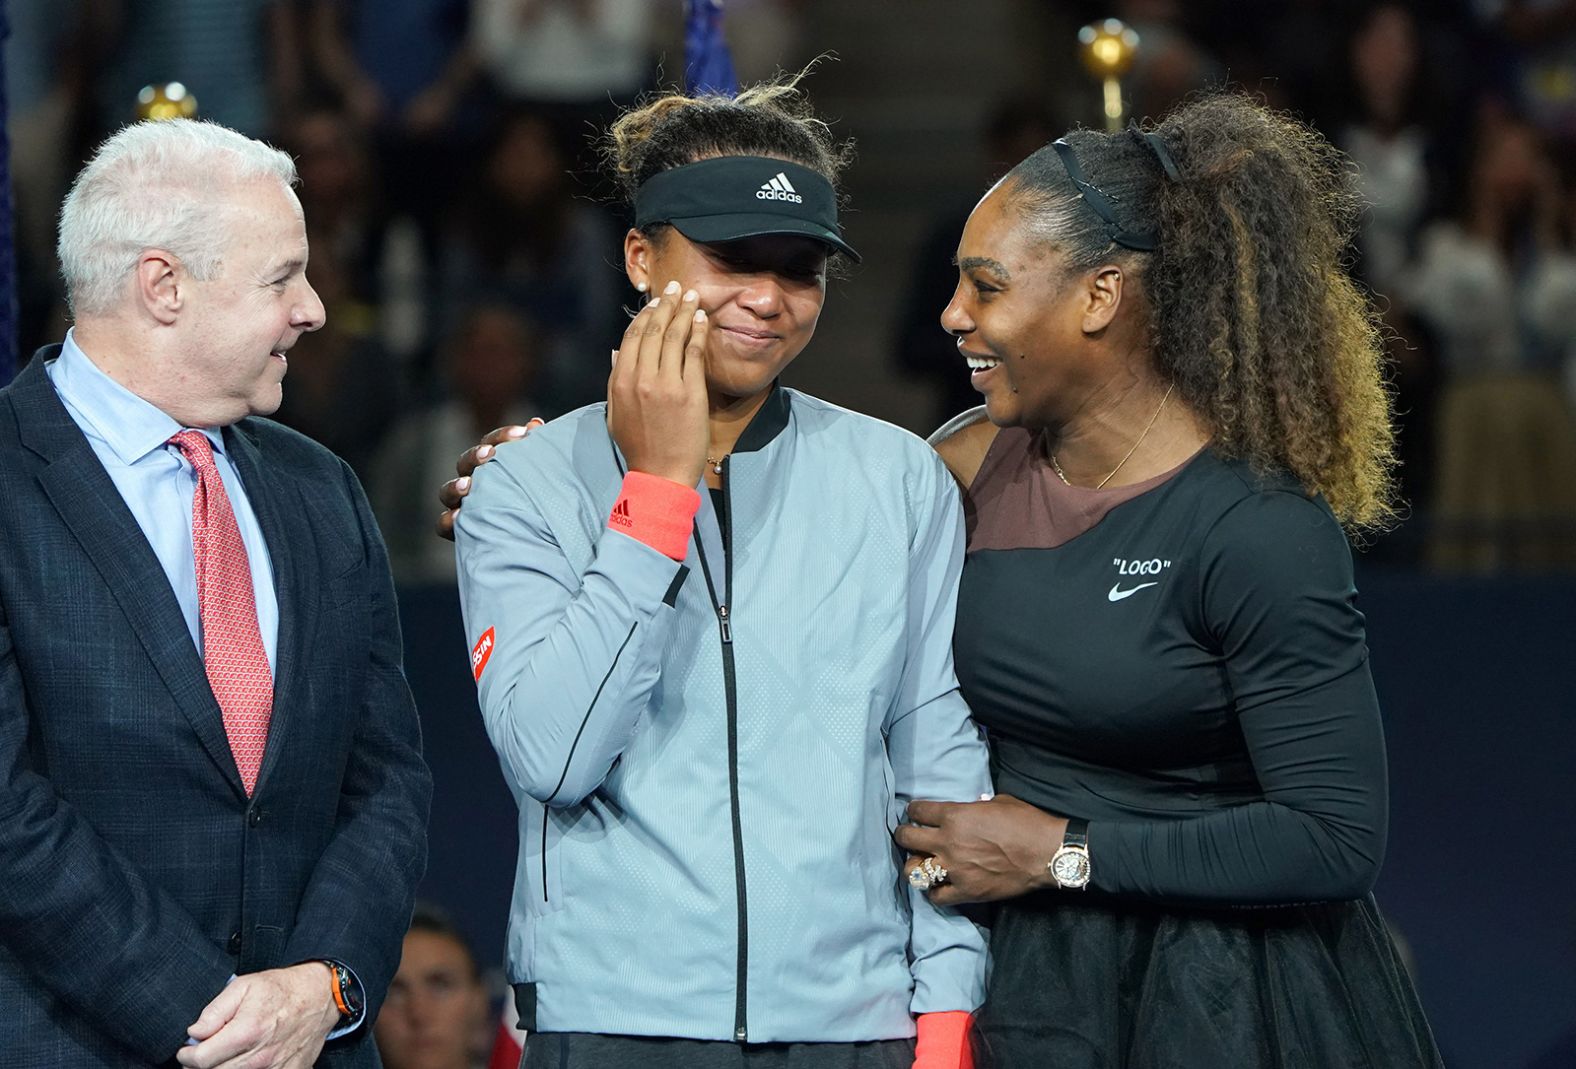 Williams consoles Osaka, who was in tears after her US Open win in 2018. Osaka had denied her idol of a 24th grand slam title, and <a href="https://www.cnn.com/2018/09/11/tennis/naomi-osaka-serena-williams-us-open-spt-intl" target="_blank">fans were booing</a> after Williams had clashed with the chair um